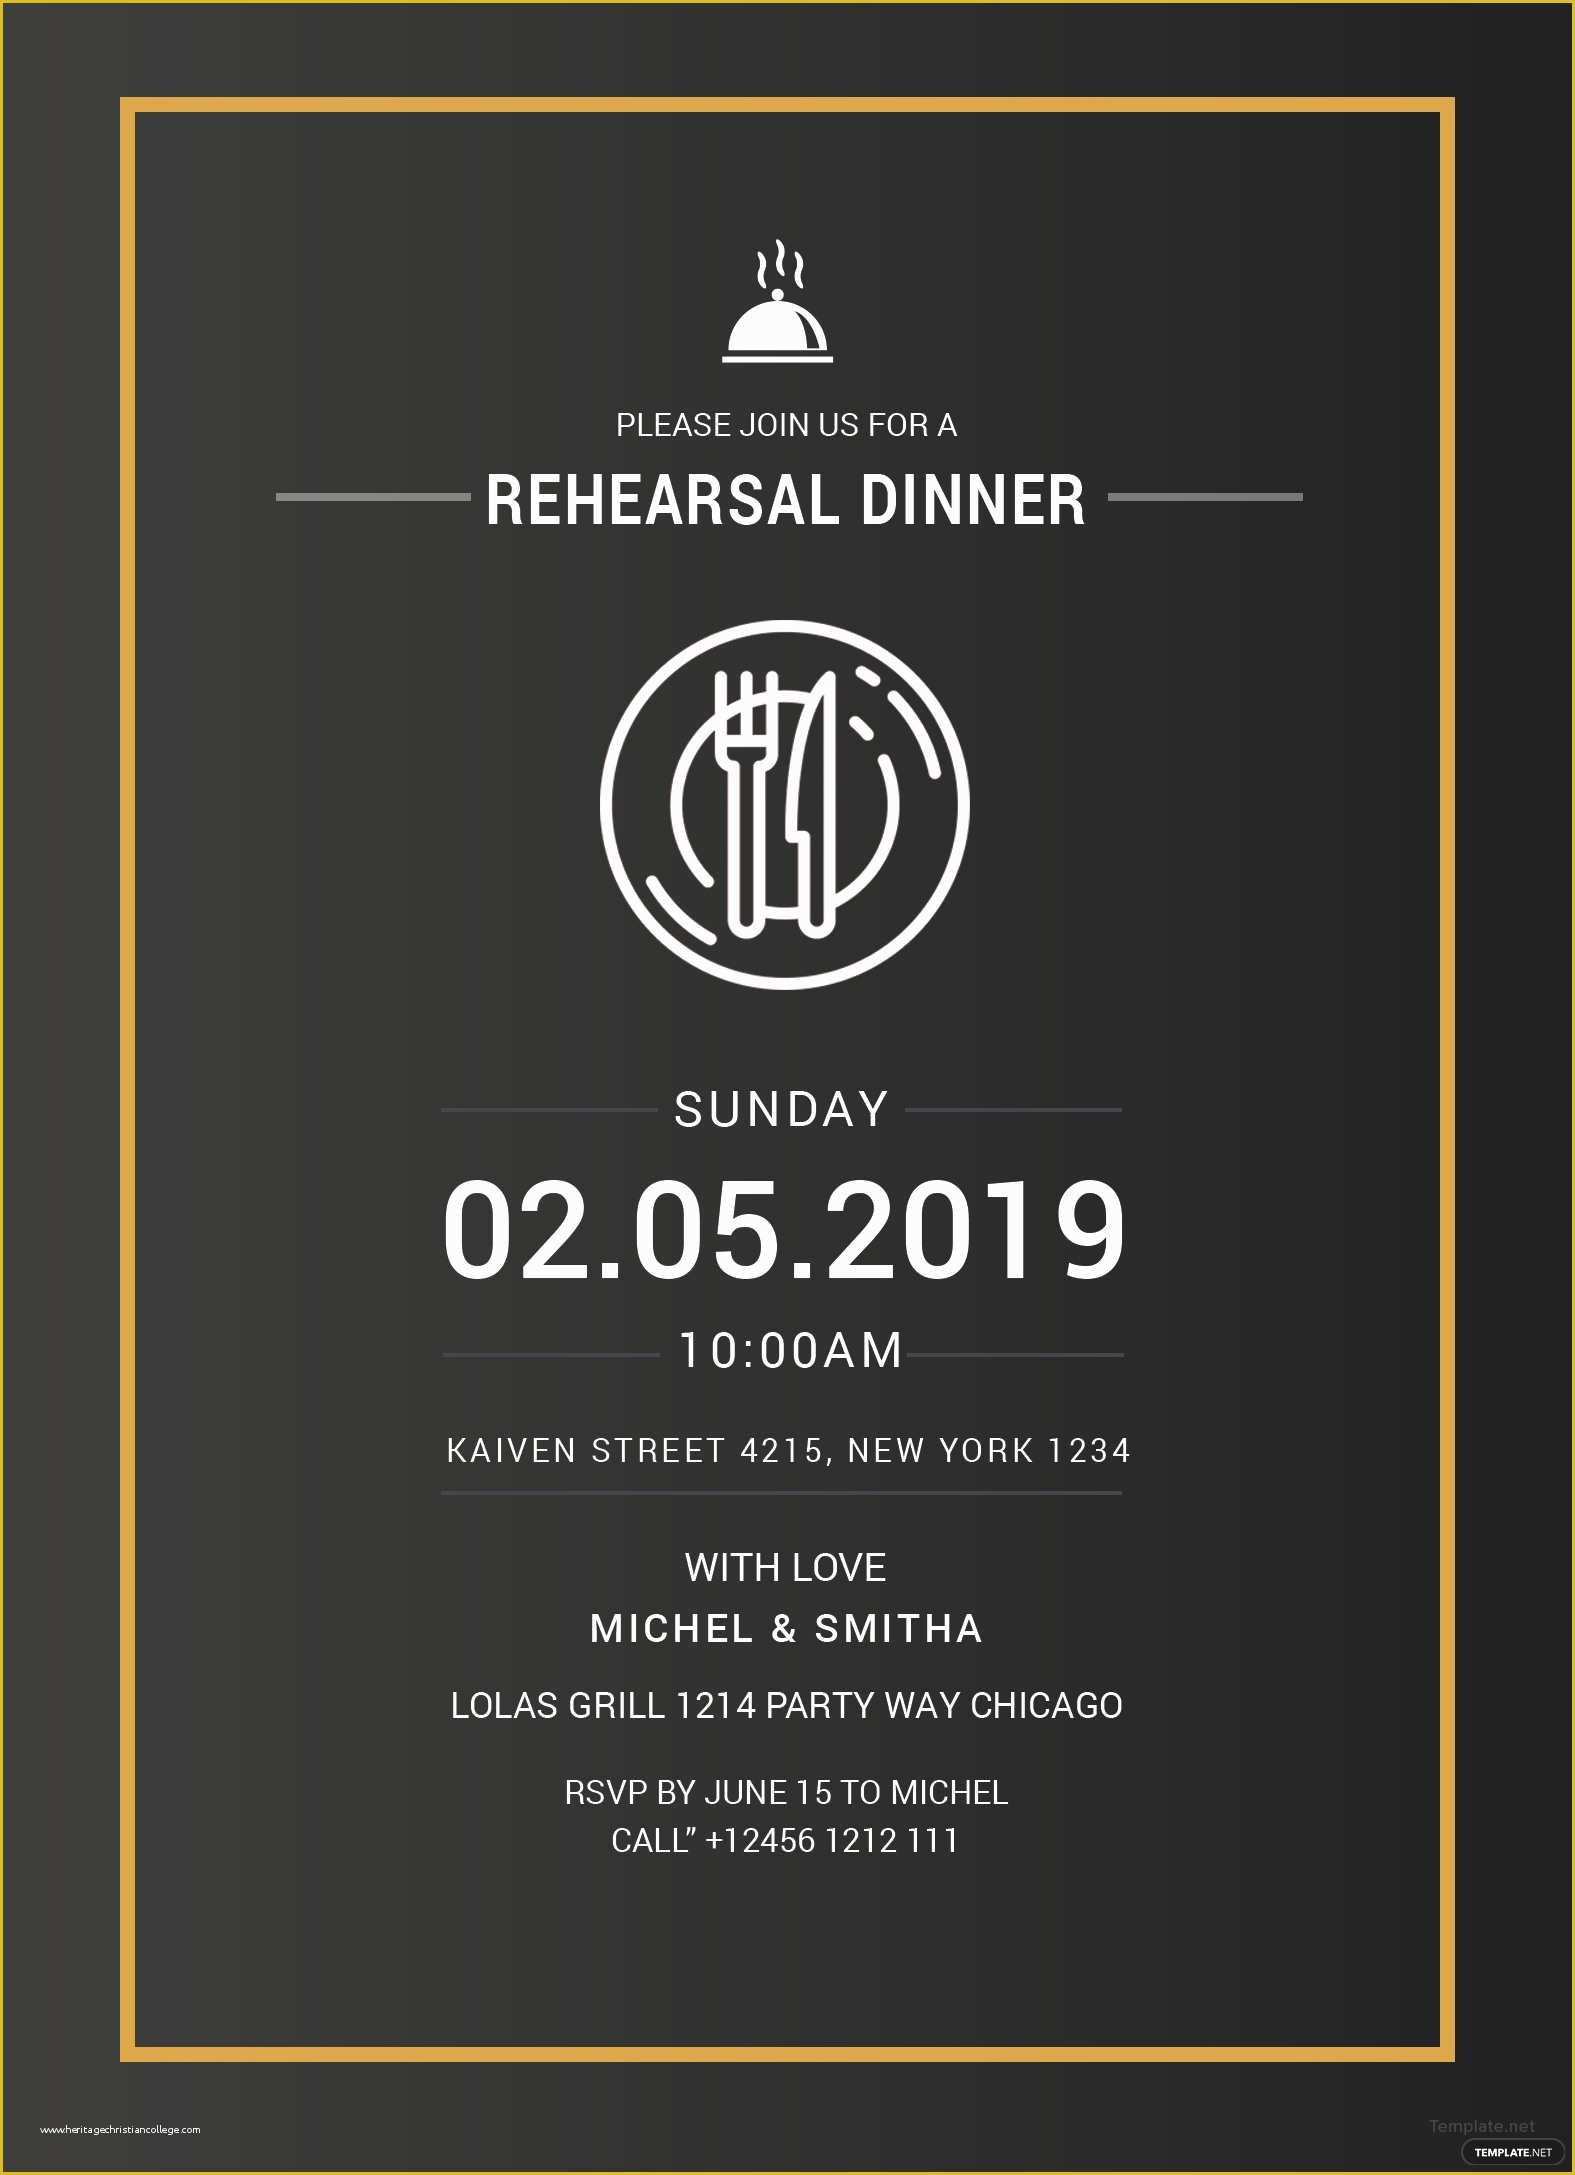 Free Dinner Party Invitation Templates Of Free Rehearsal Dinner Party Invitation Template In Adobe